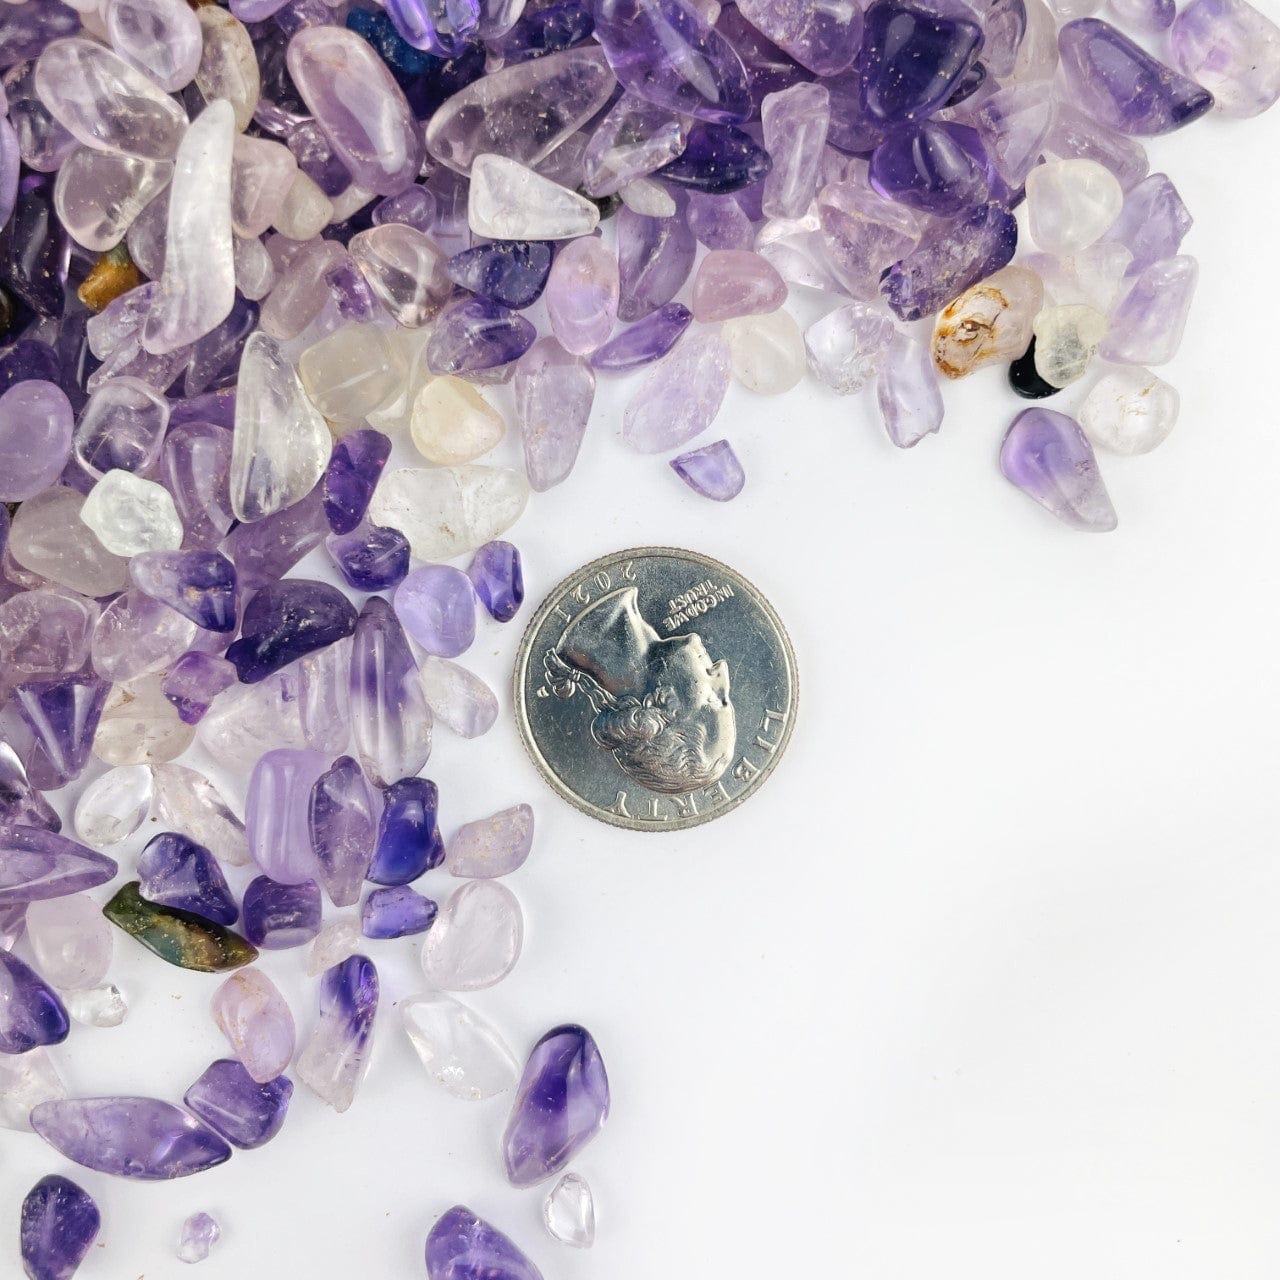  Amethyst Polished Small Chip Stones next to a quarter for size reference